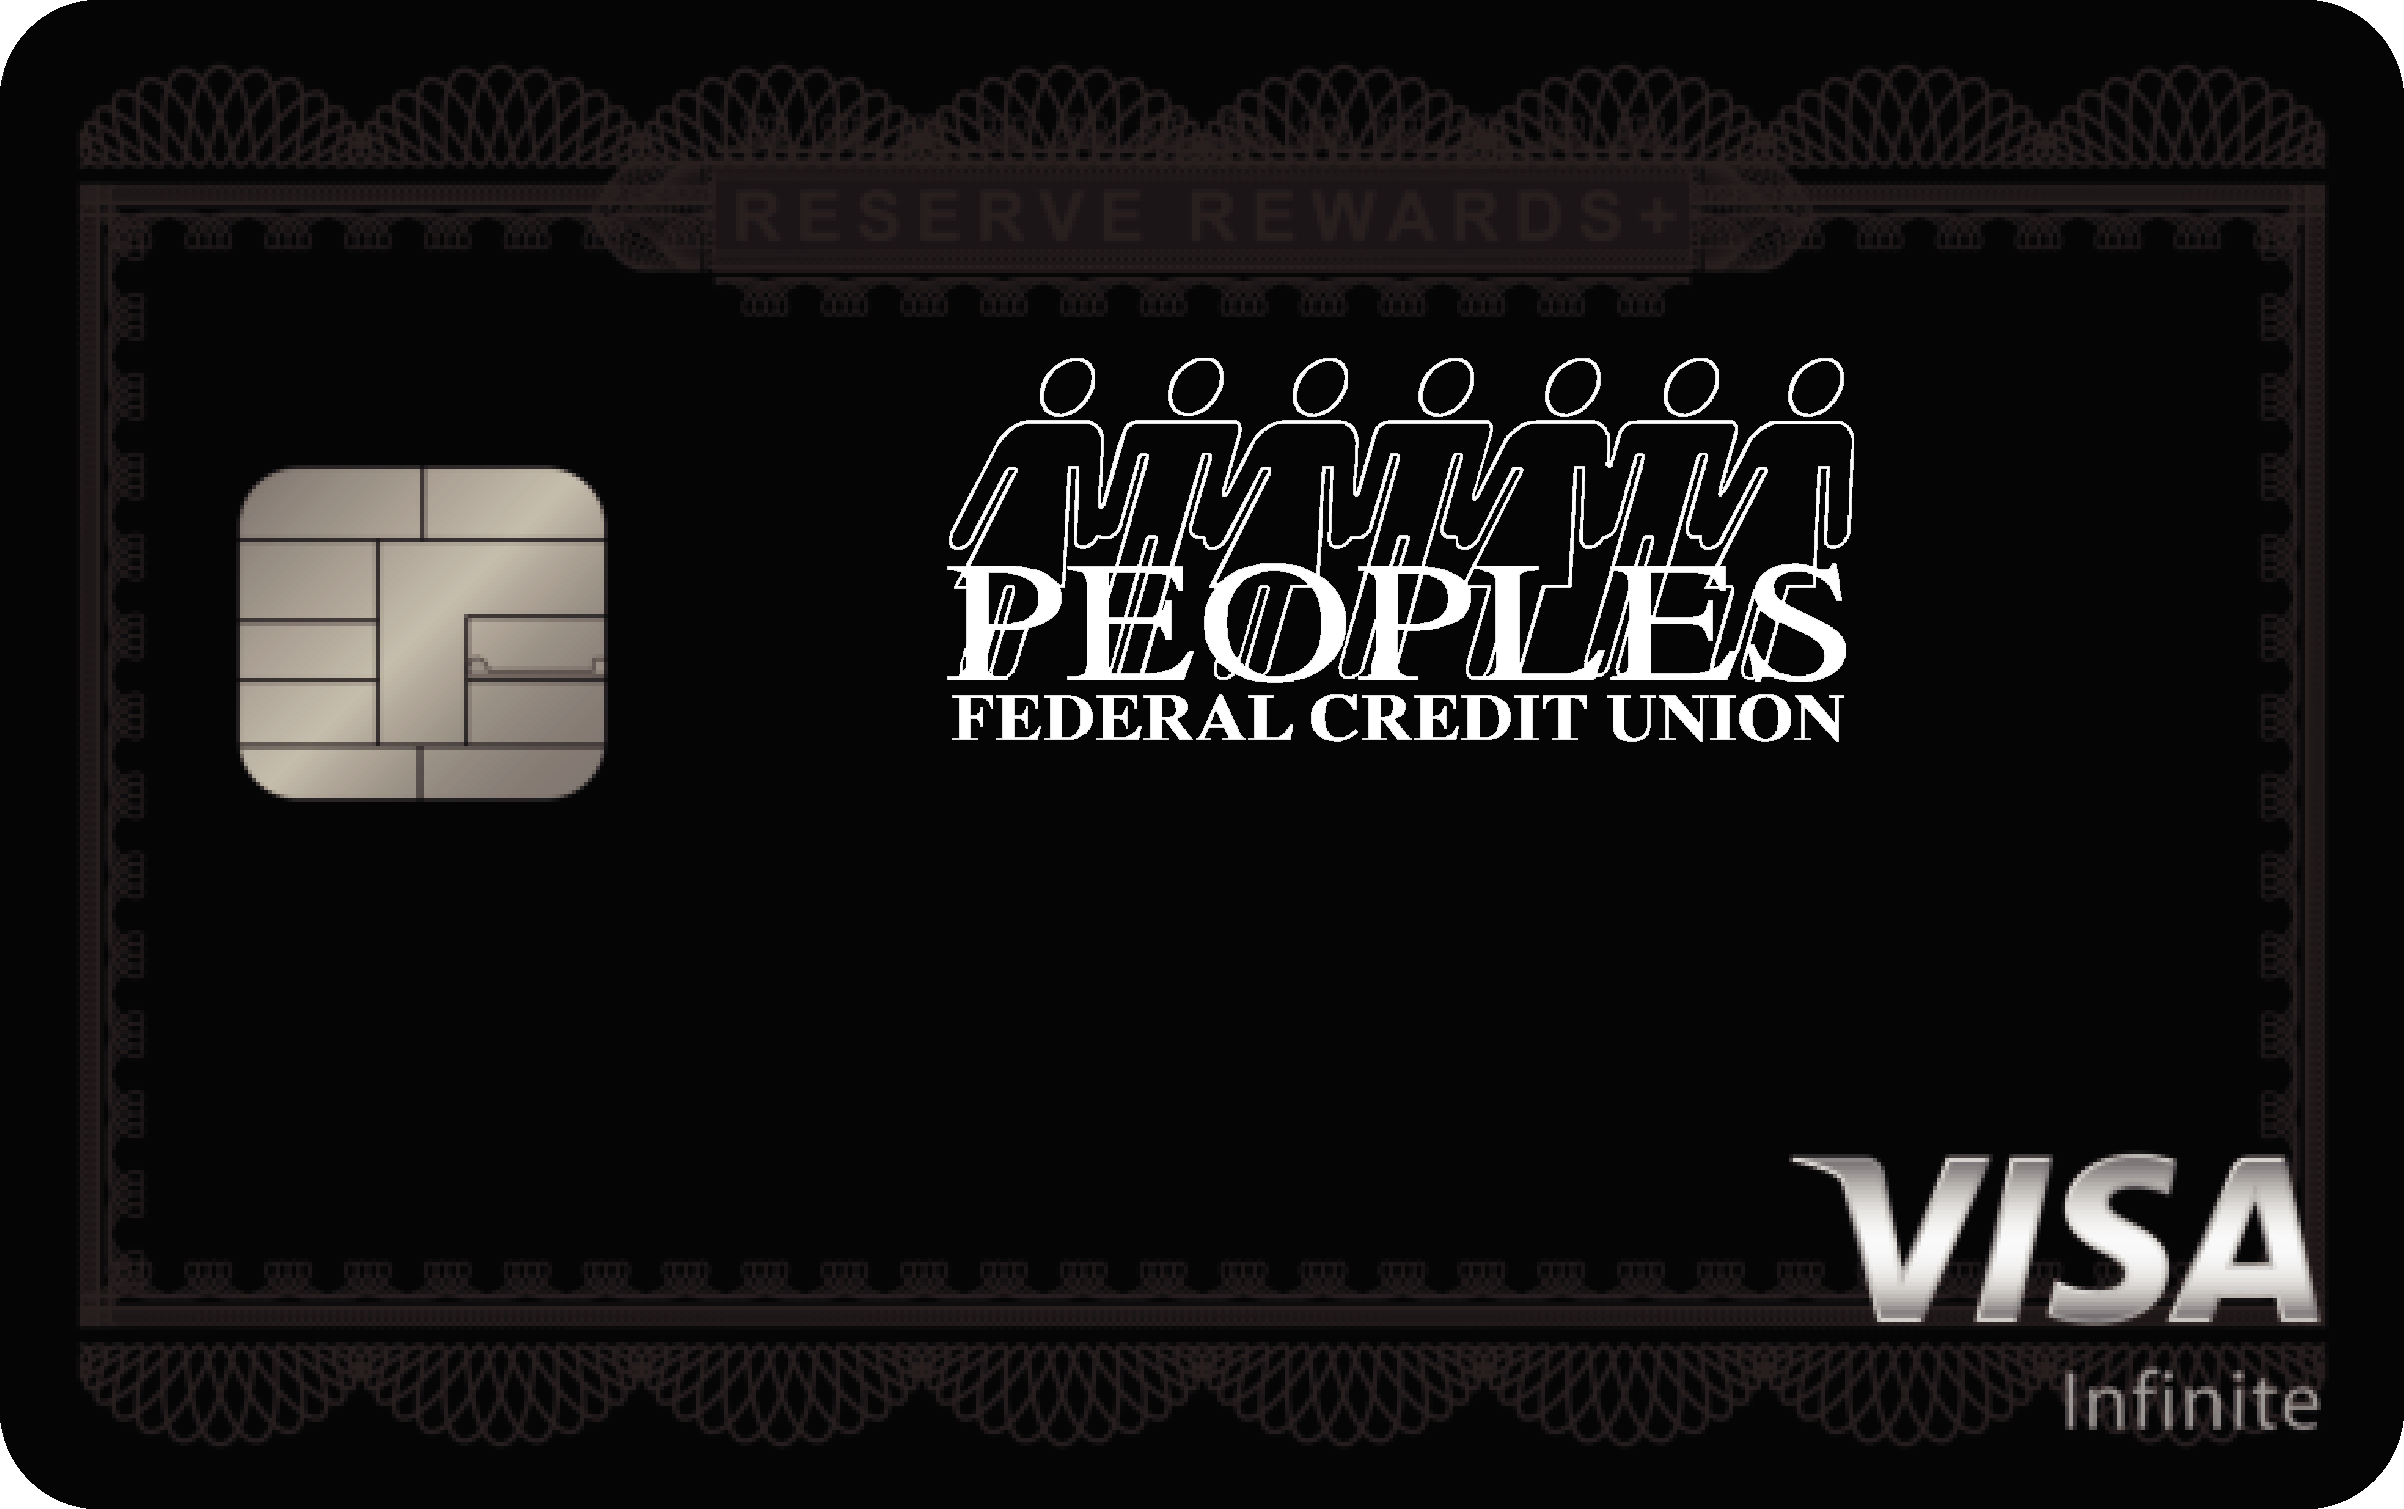 Peoples Federal Credit Union